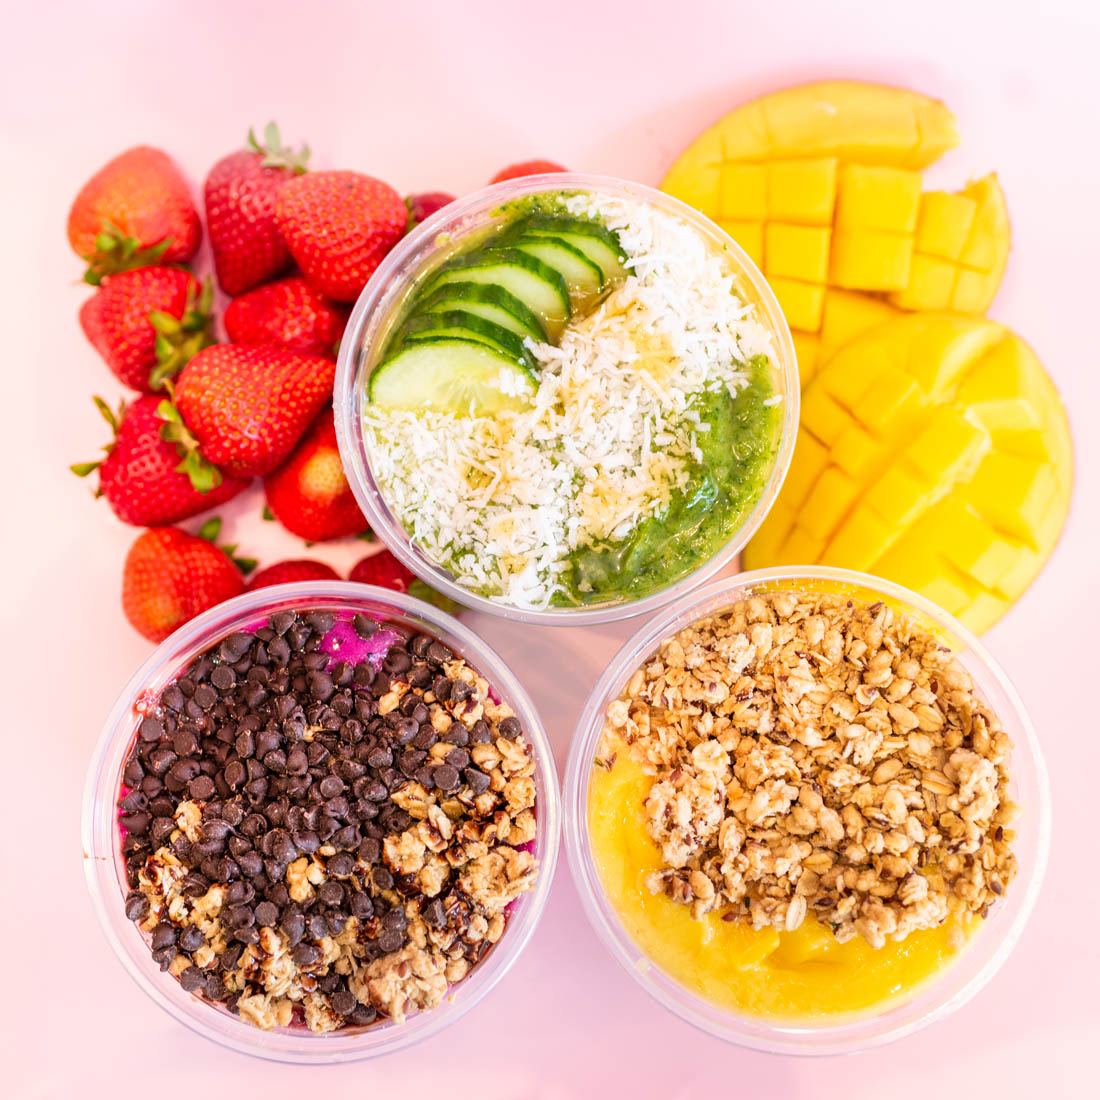 Rush Bowls smoothie bowls nutrition info in Boulder, CO.